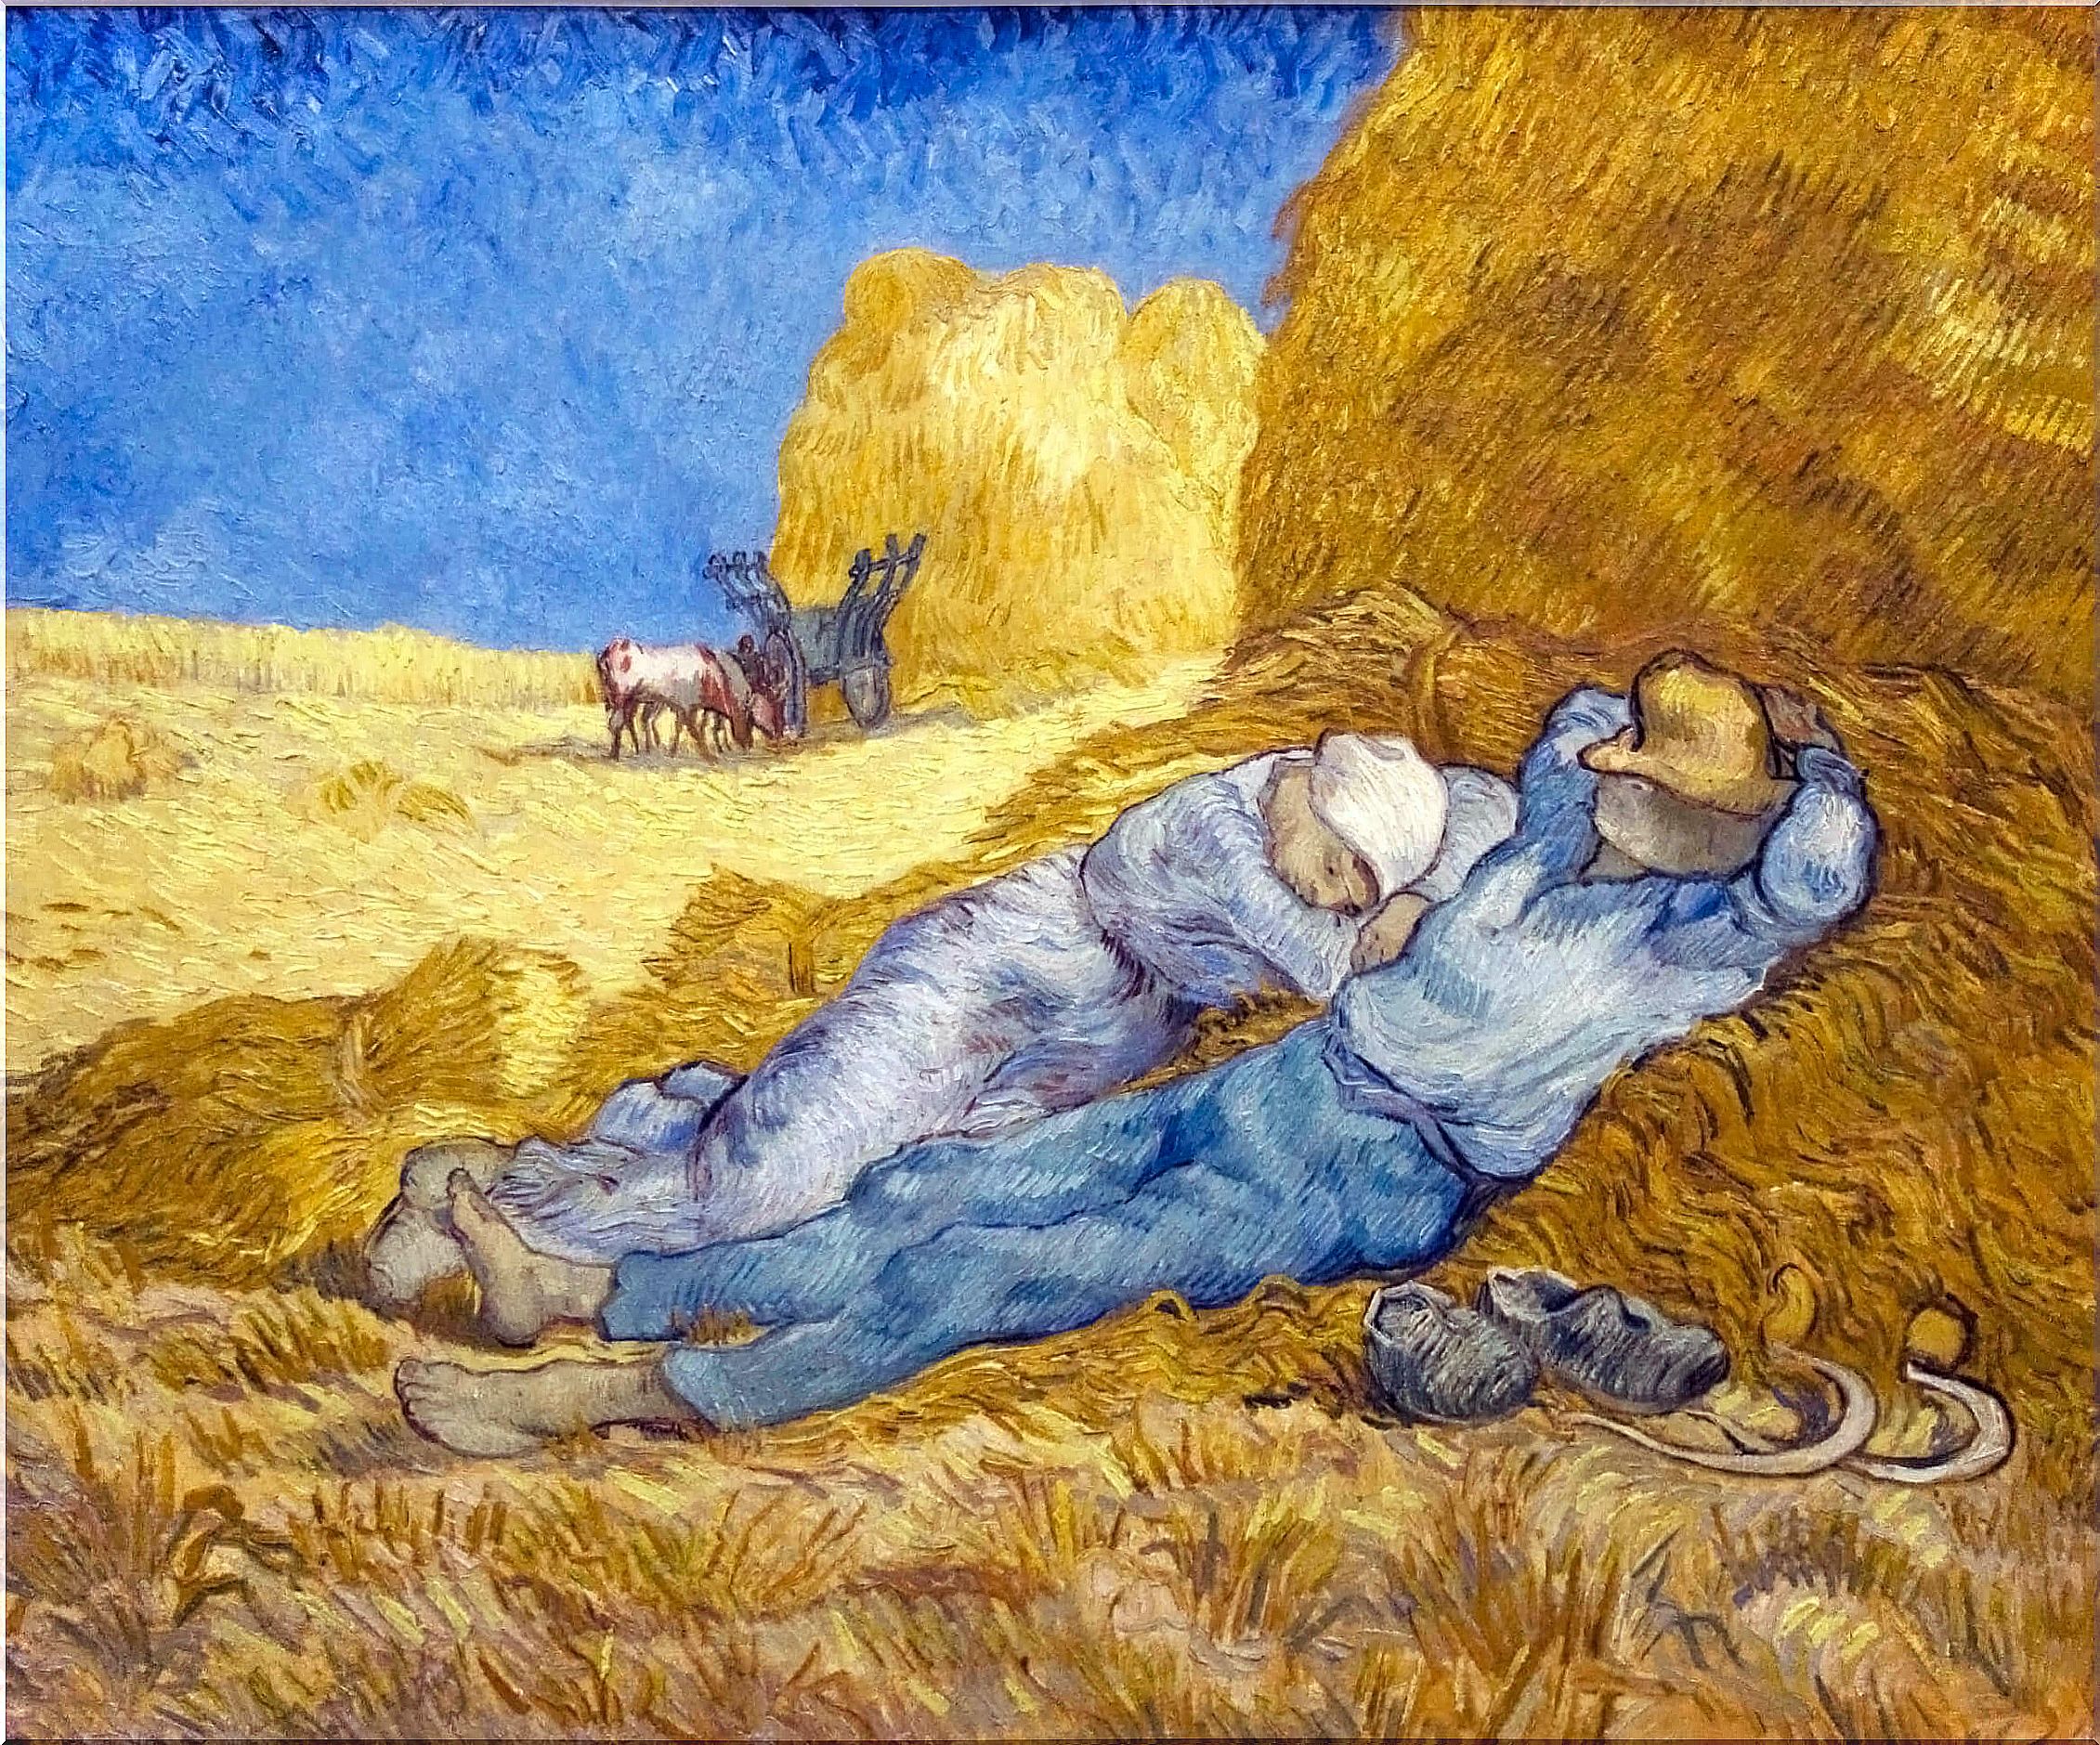 Vincent Van Gogh would not have committed suicide